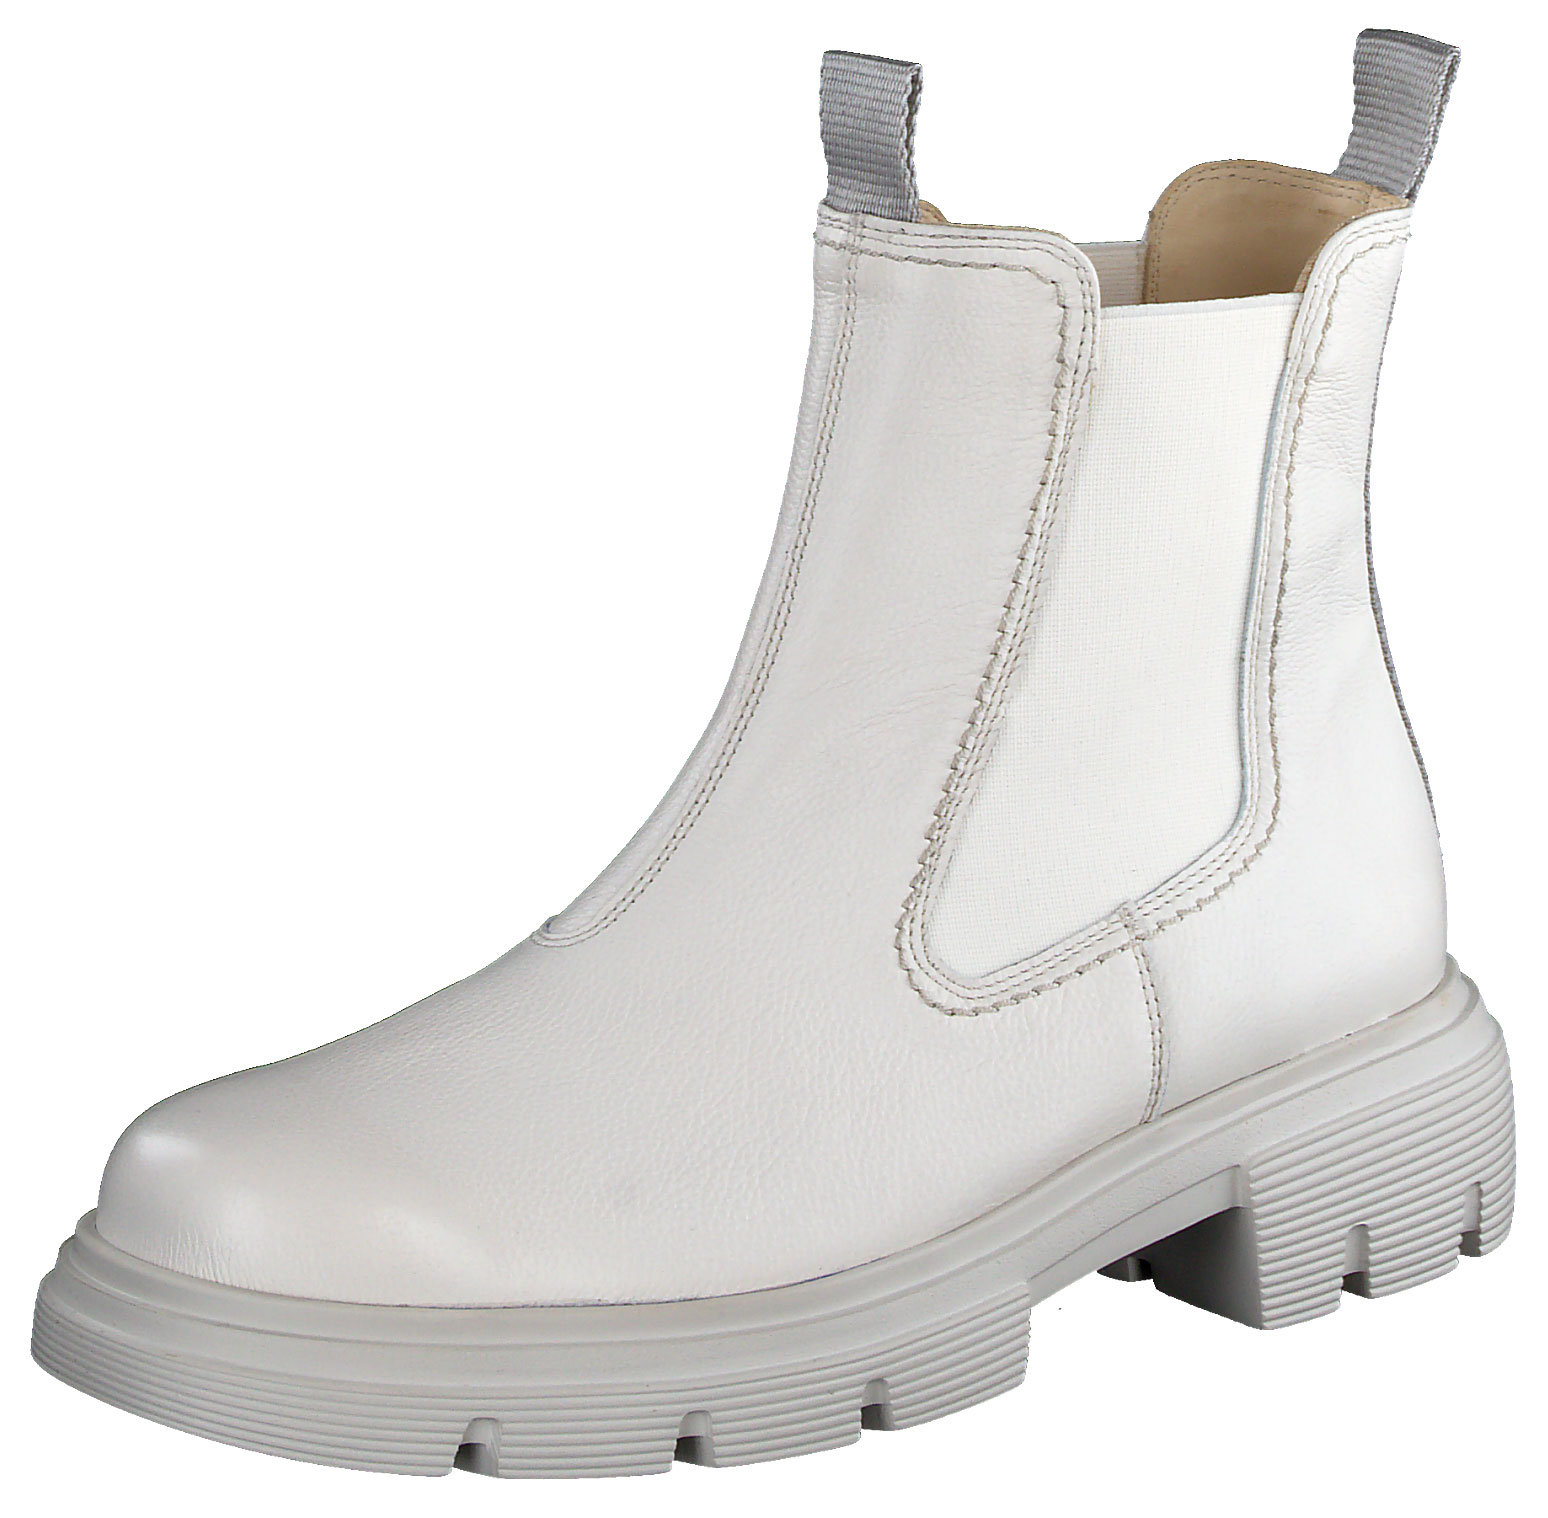 Chelsea-Boots - White smooth leather